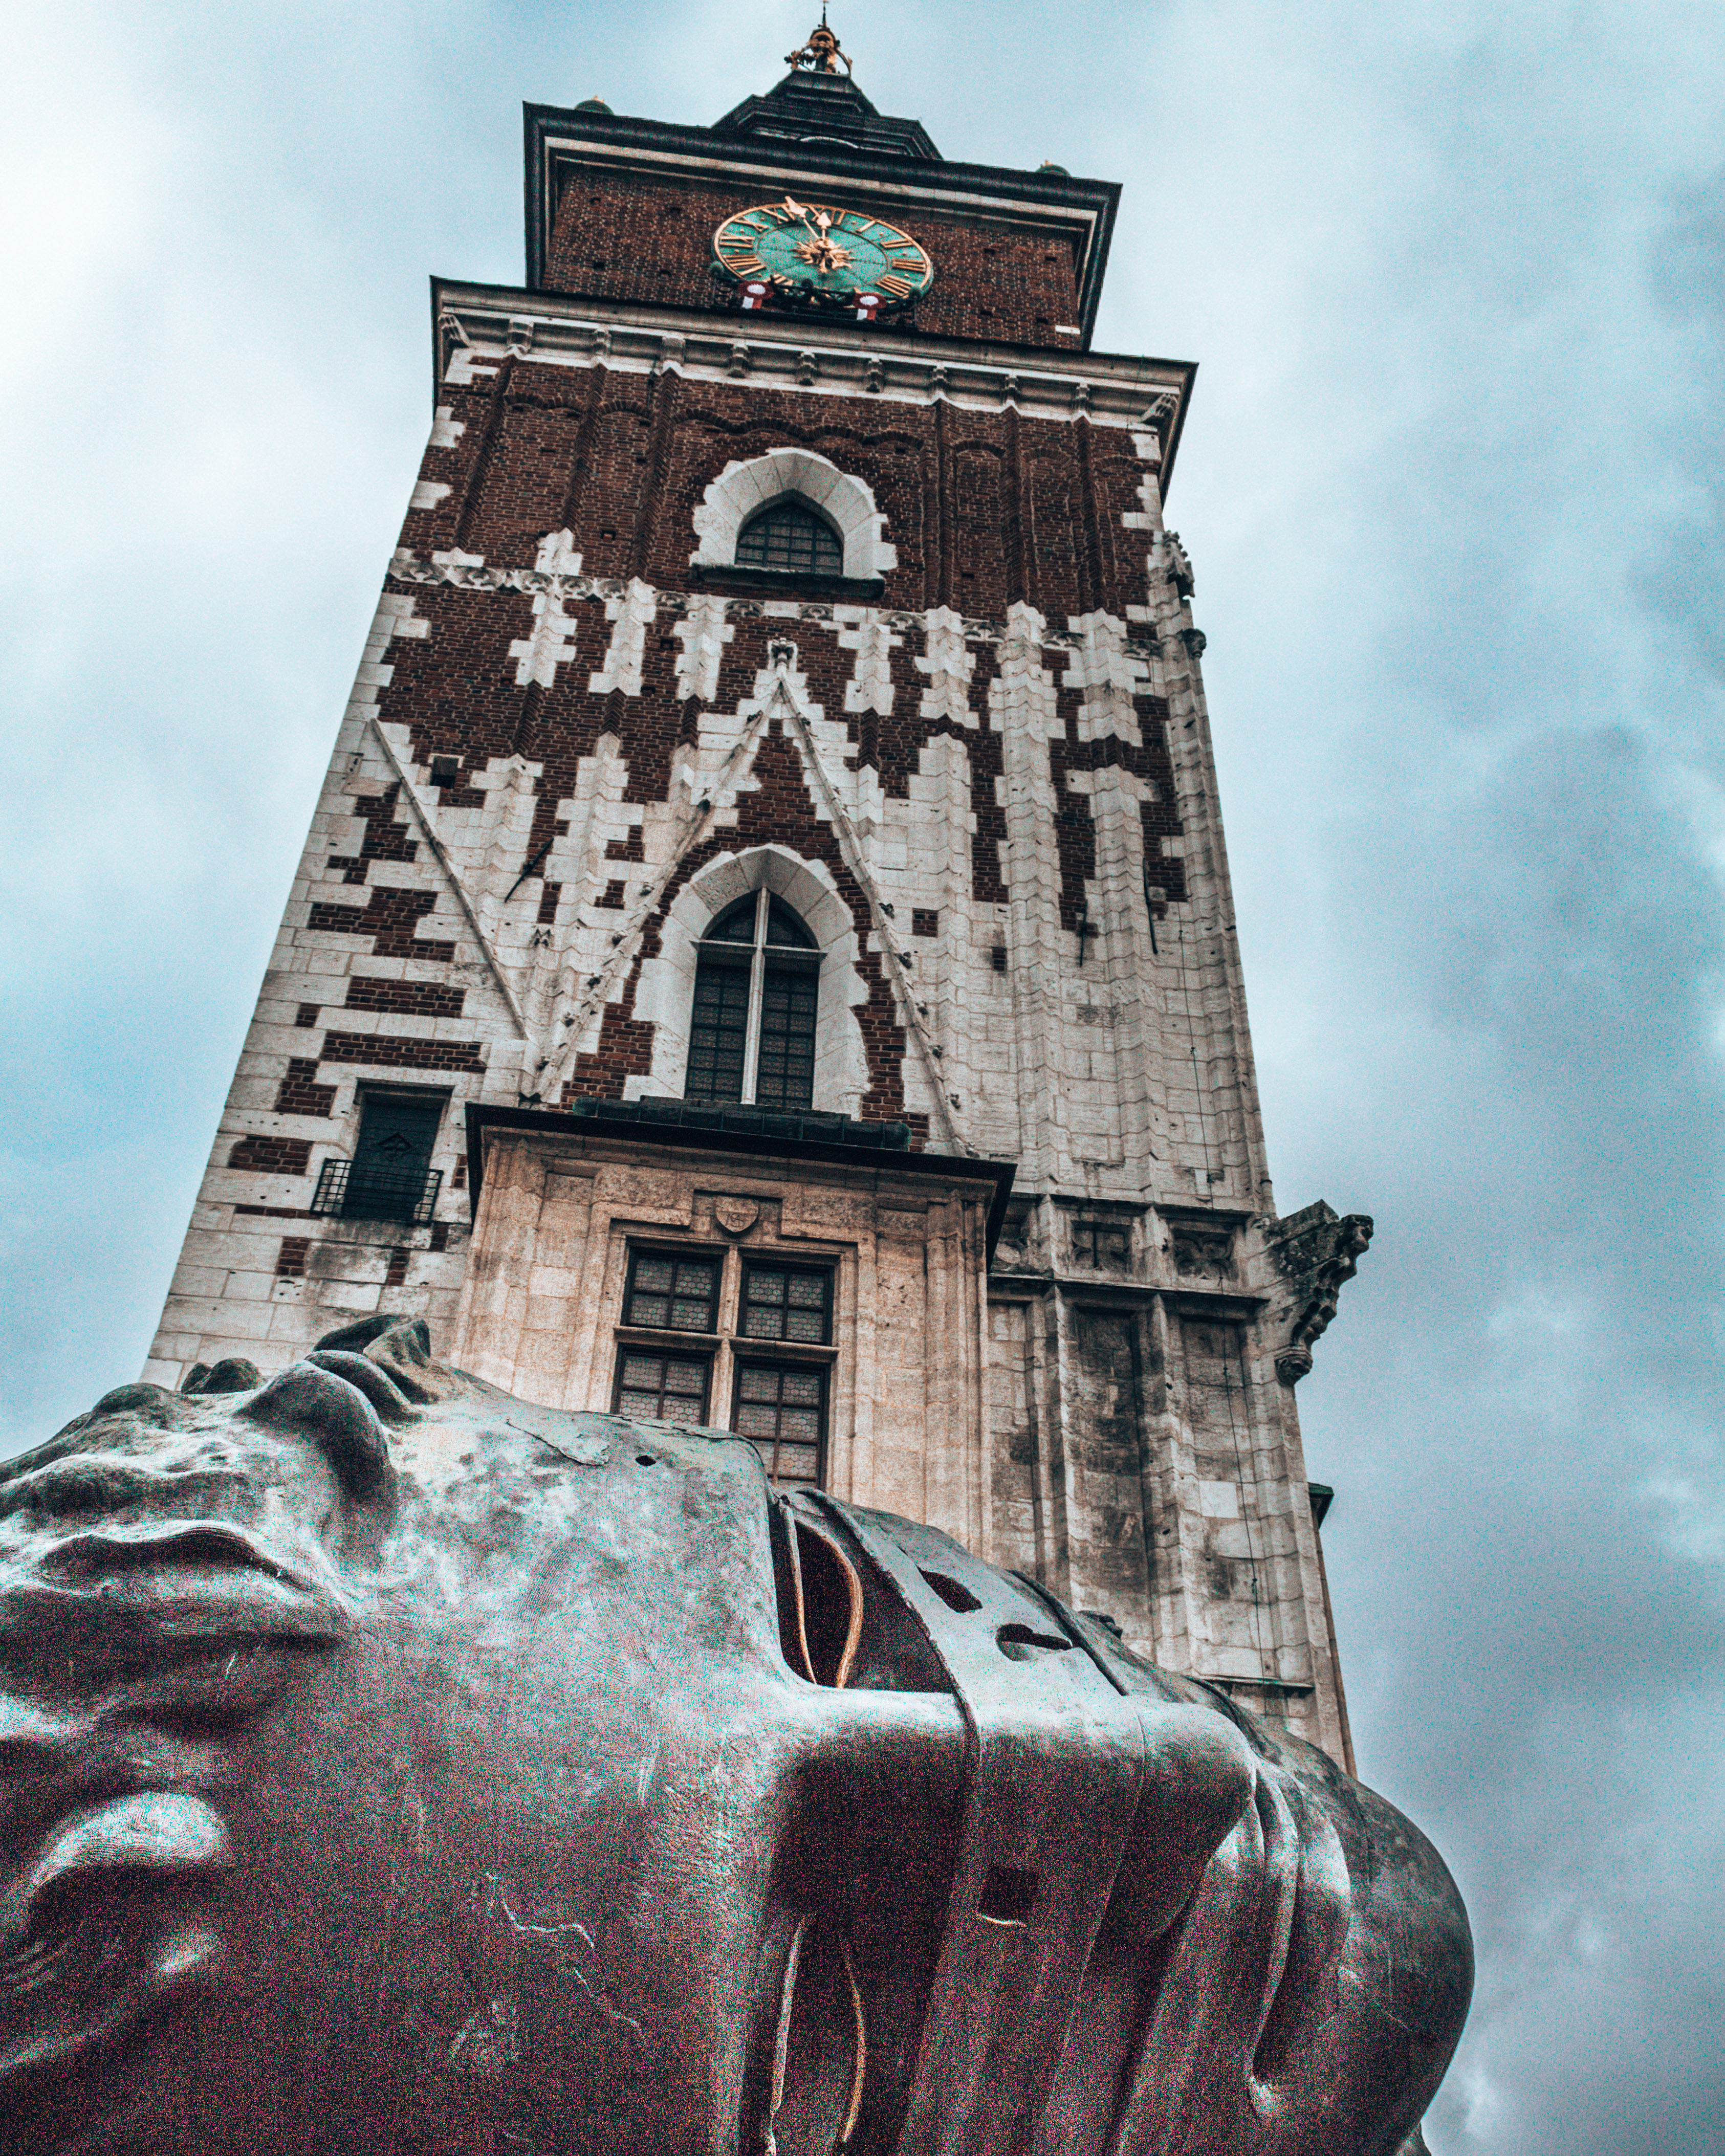 The Town Hall Tower and a sculpture of a head in the old town of Krakow, Poland